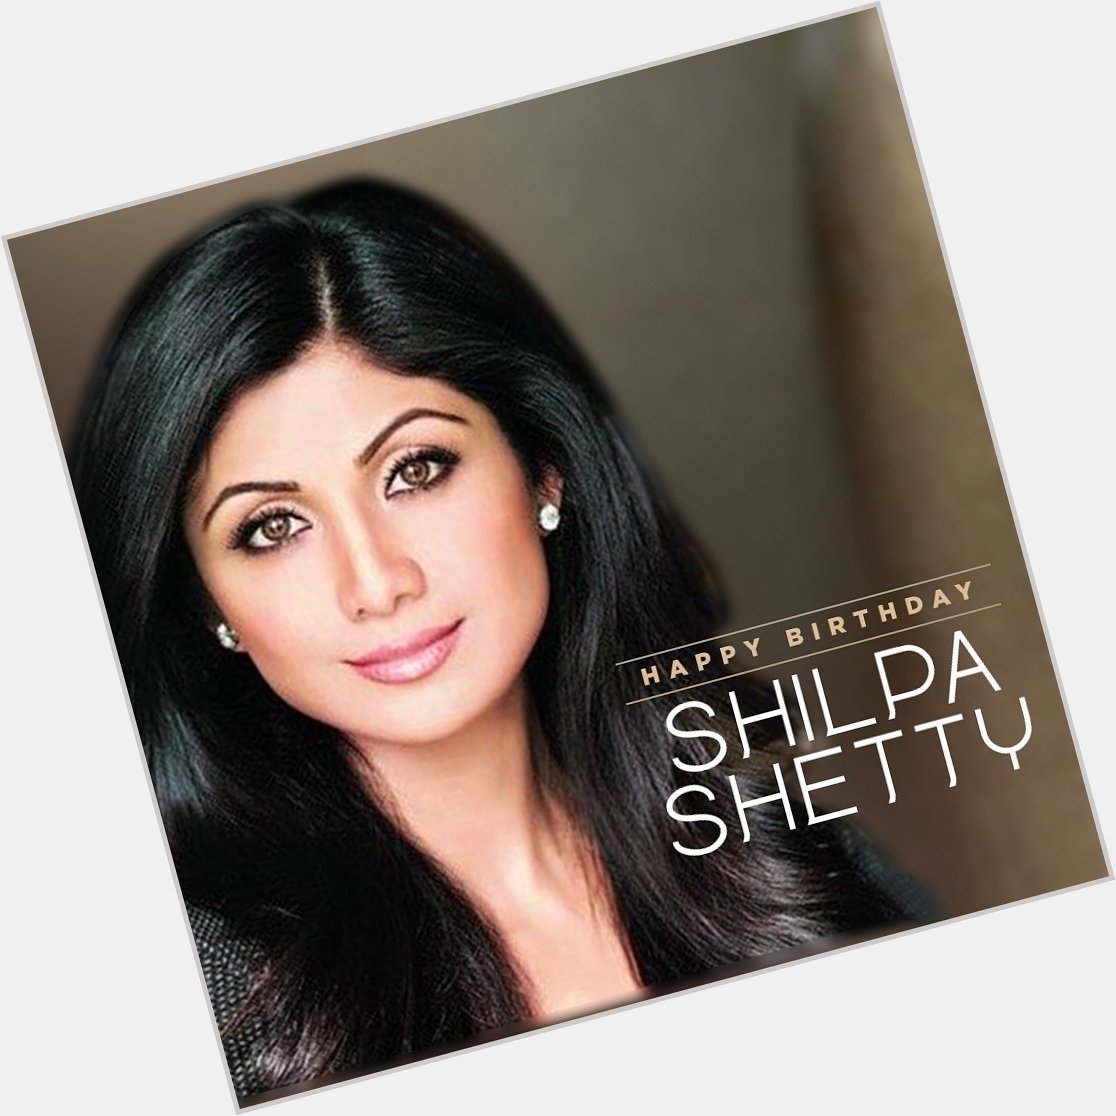 Here s wishing the gorgeous a birthday that is as amazing as her! Happy birthday, Shilpa Shetty! 